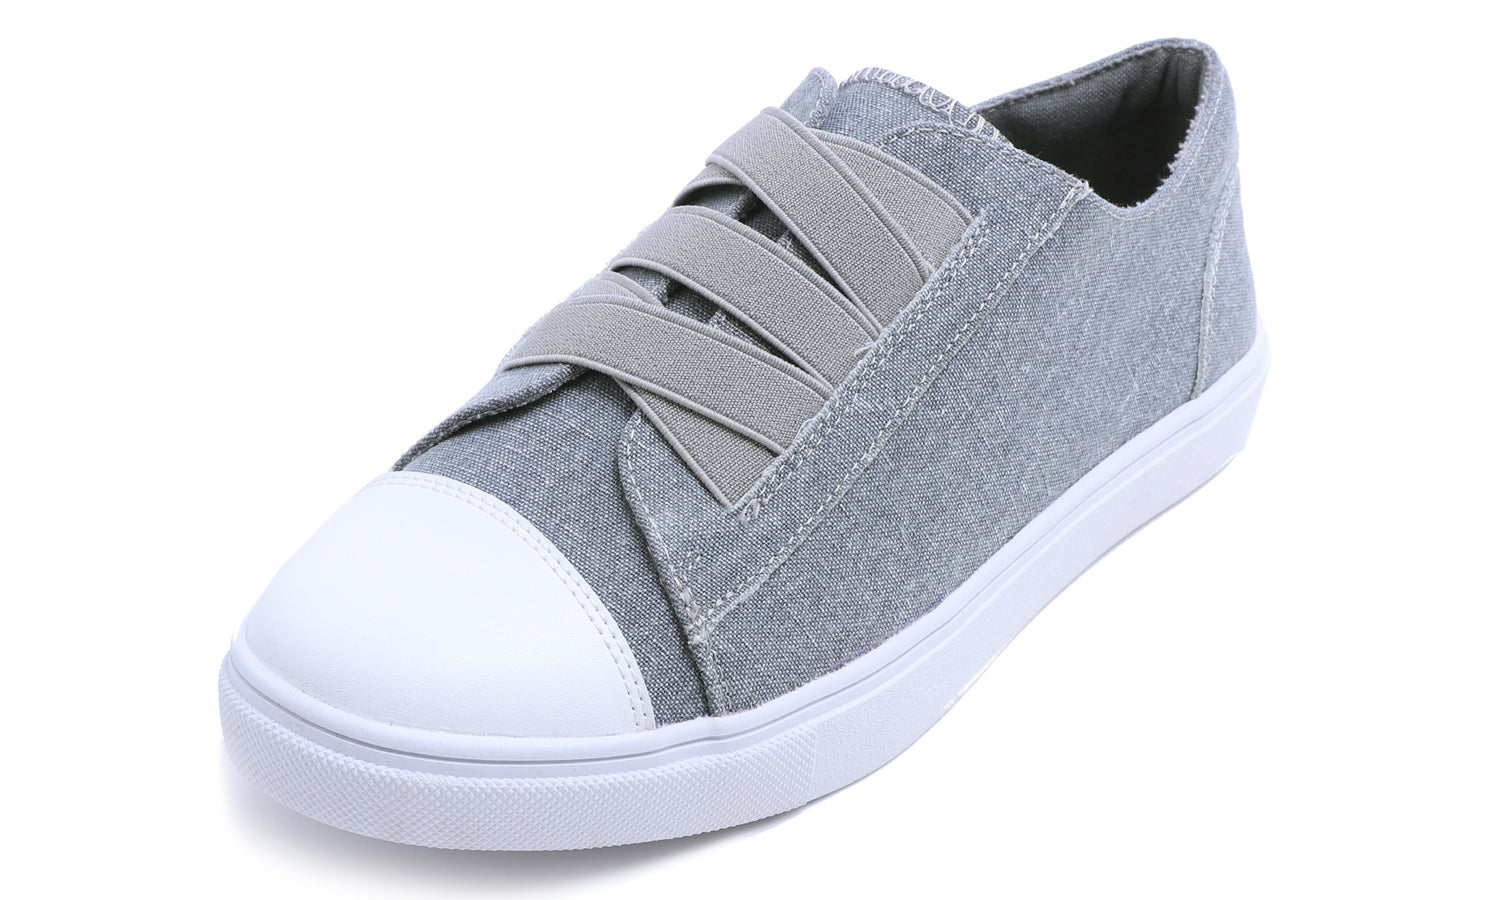 Feversole Women's Casual Slip On Sneaker Comfort Cupsole Loafer Flats Fashion Canvas Easy Elastic Low Top Grey